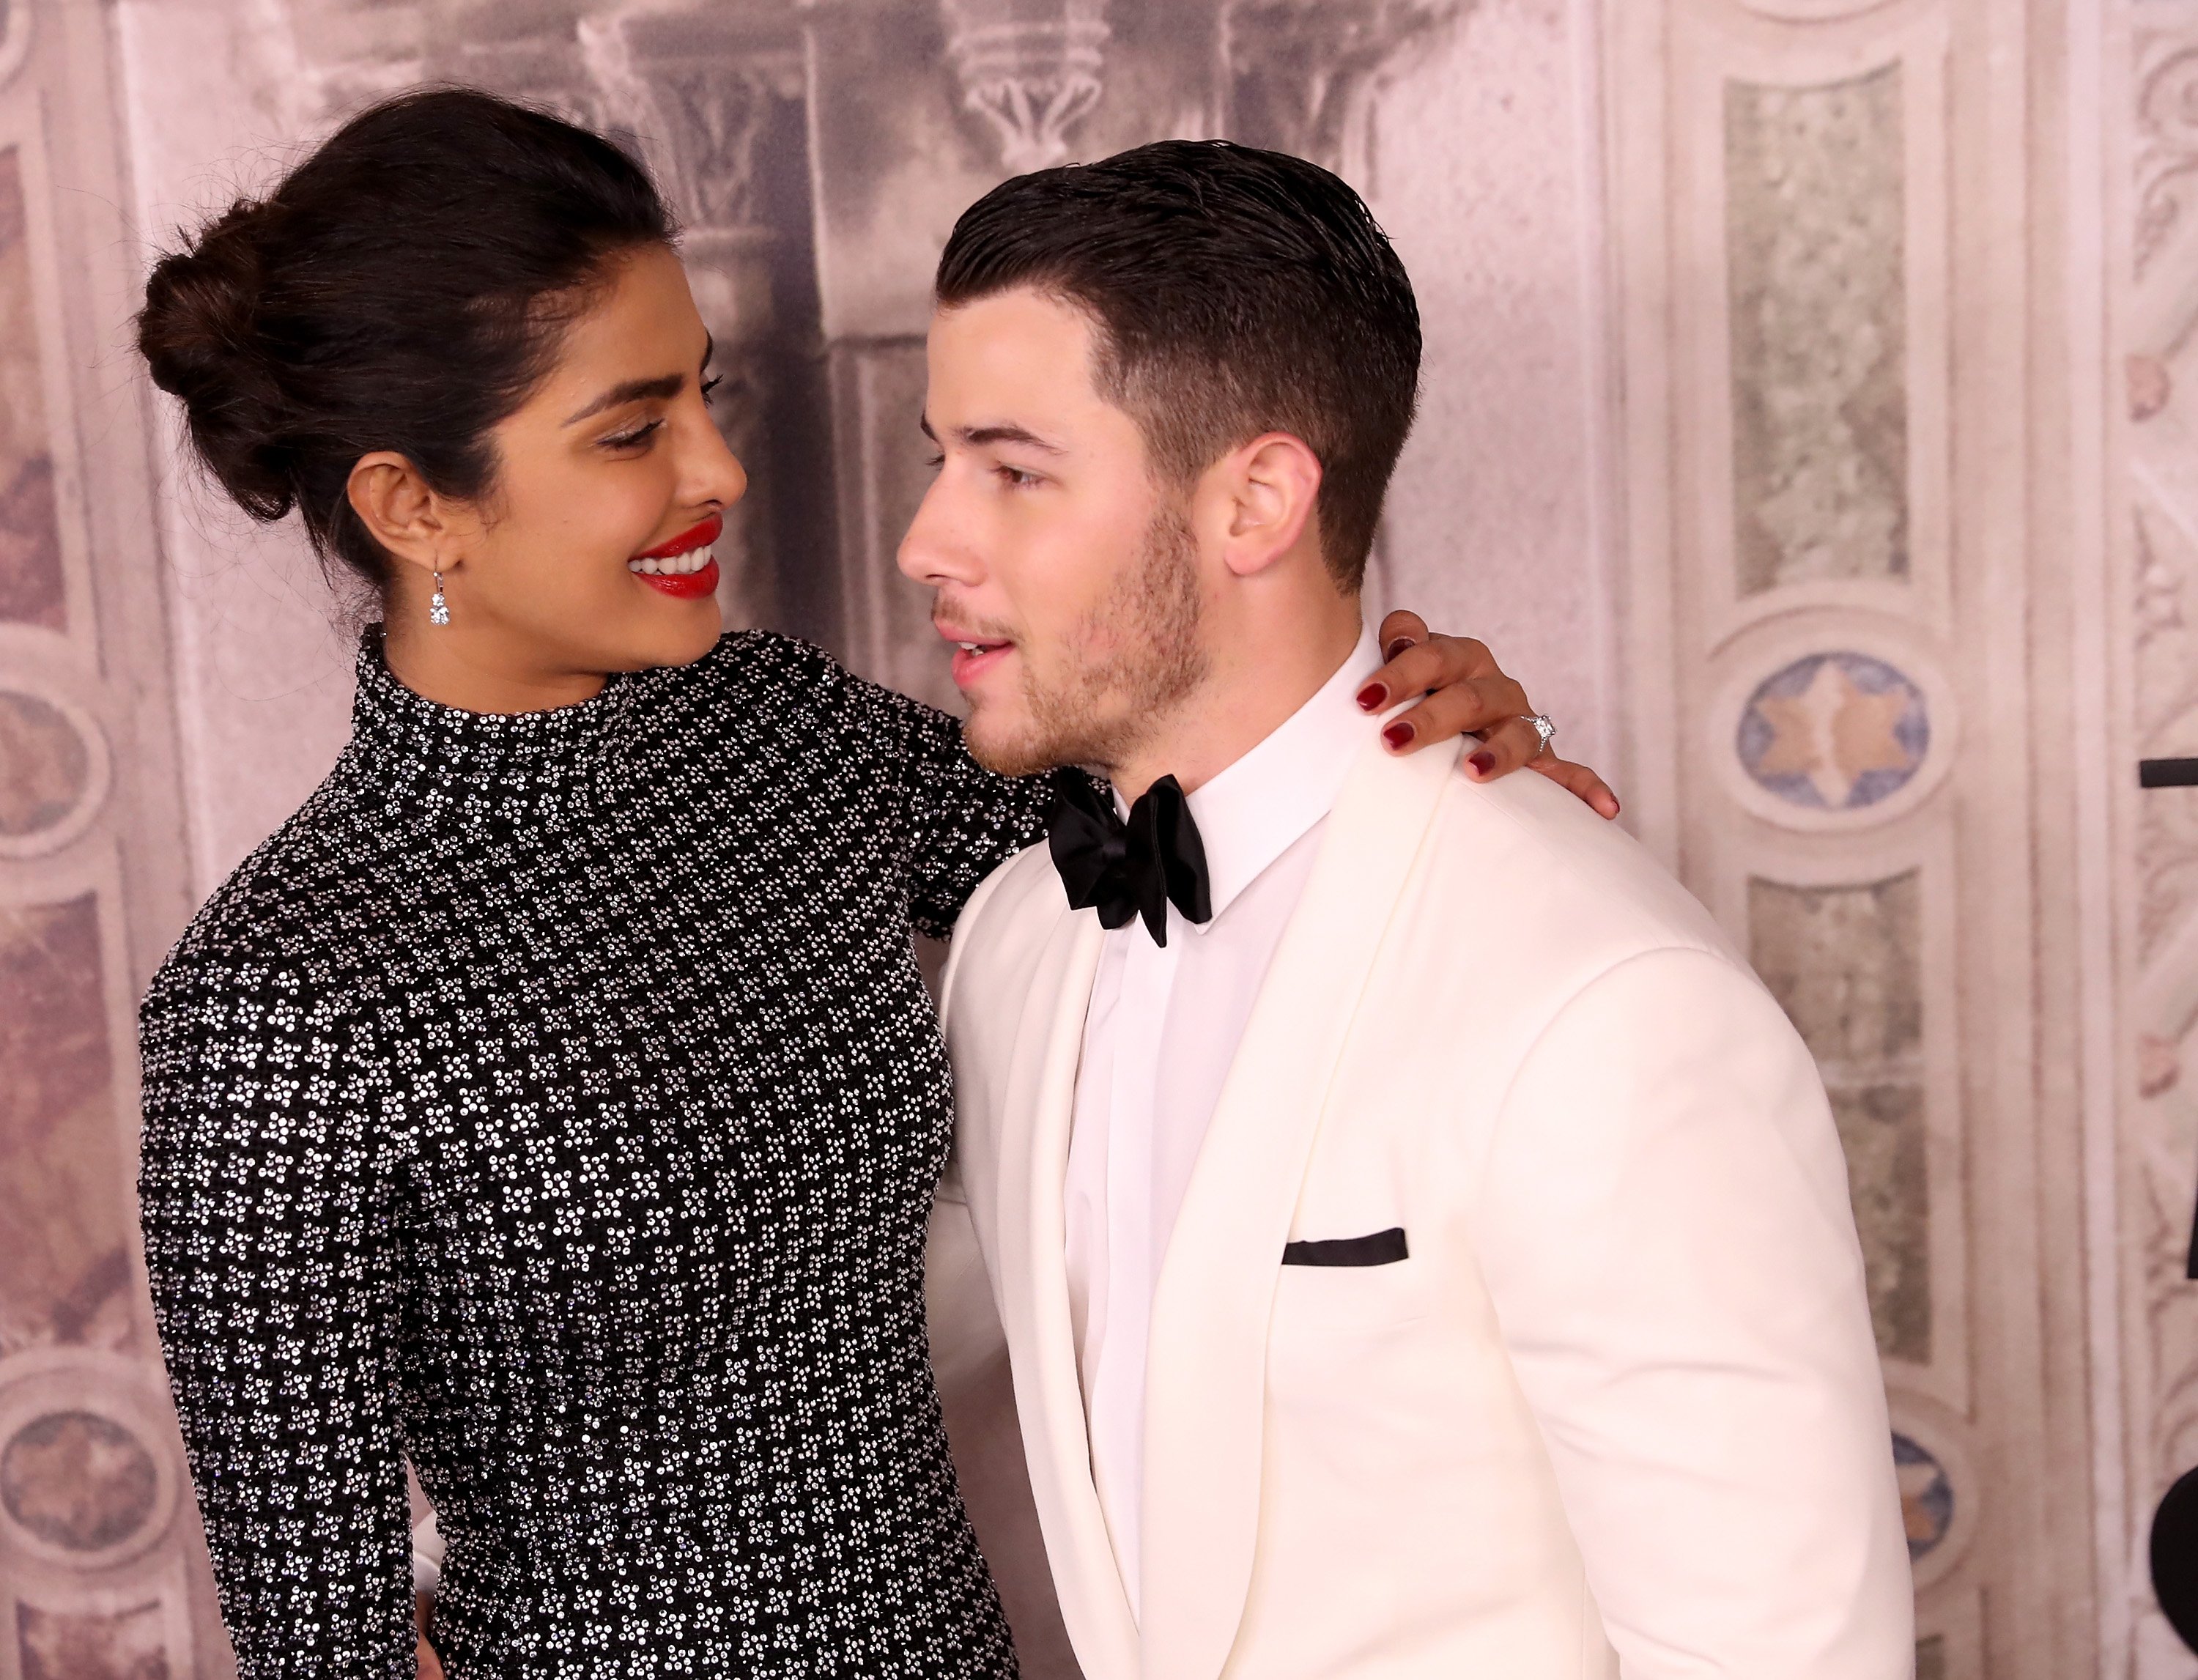 Priyanka Chopra and Nick Jonas attend the Ralph Lauren fashion show during New York Fashion Week at Bethesda Terrace on September 7, 2018 in New York City | Photo: Getty Images